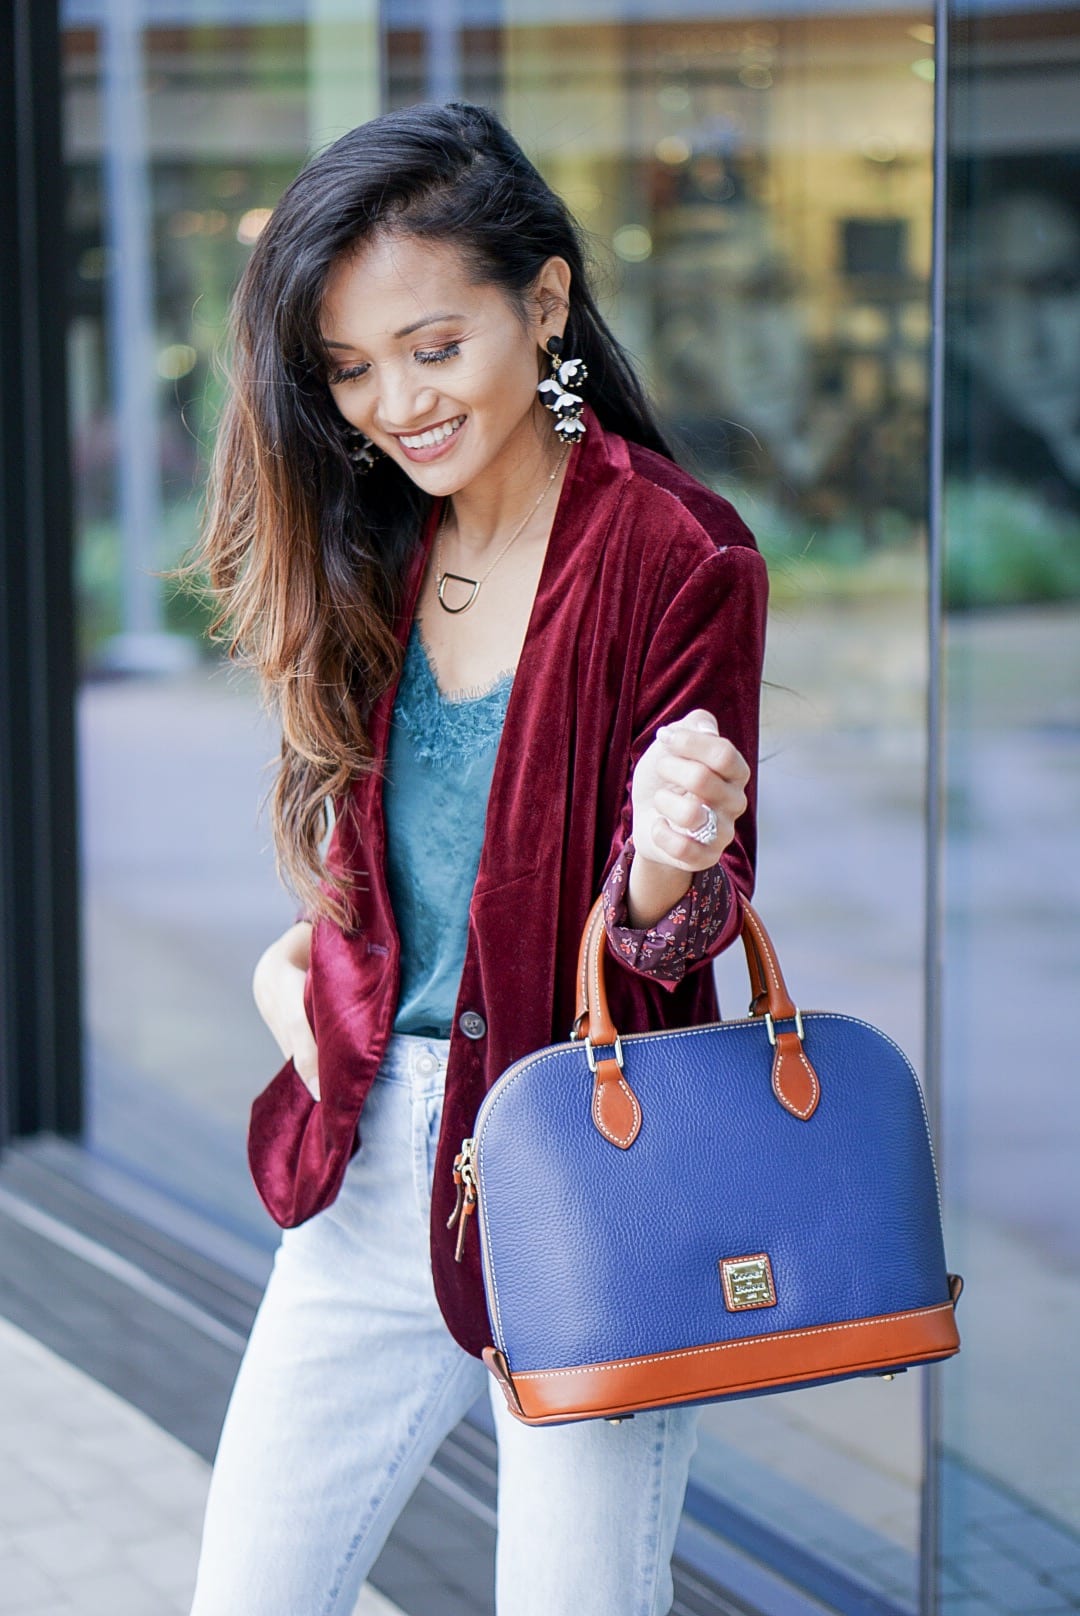 Dooney & Bourke Pebble Zip Zip Satchel, velvet blazer, old navy, zappos, doctor bag, satchel, mom jeans, high waisted straight jeans, high waisted crop jeans, velvet booties, Burgundy booties, Christmas outfit, holiday style, New Years outfit 